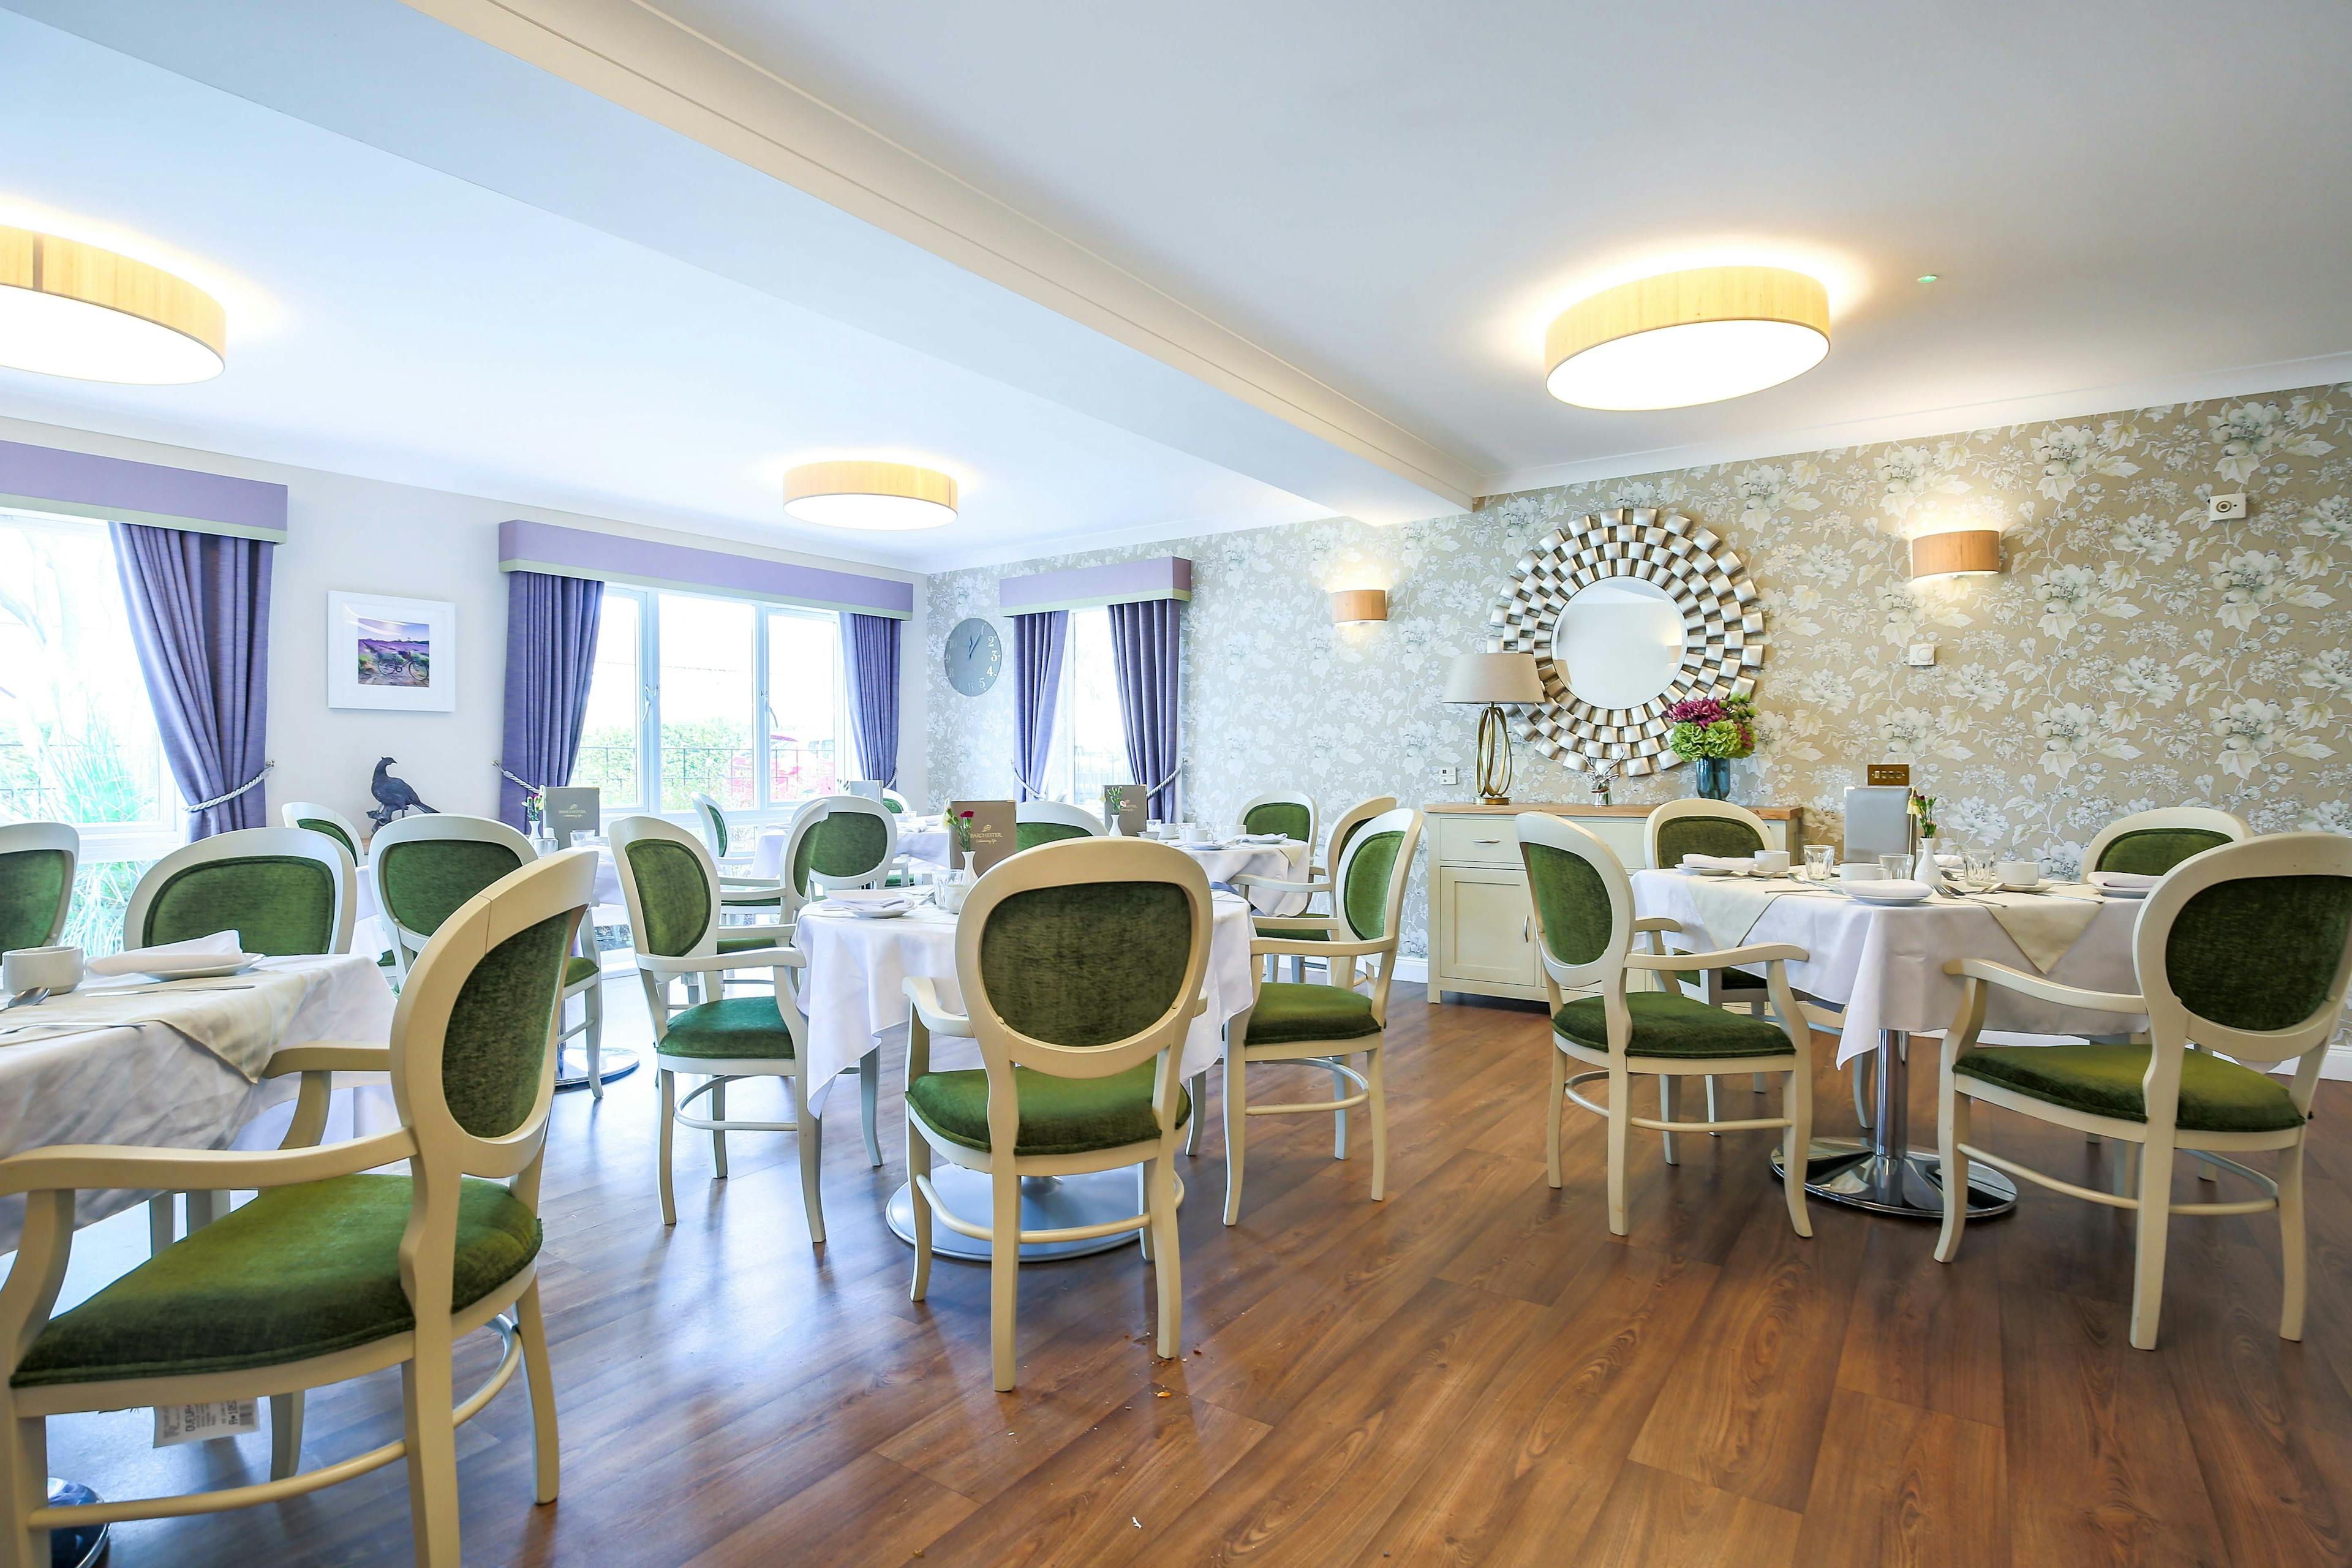 Dining Area at Station Court Care Home in Ashington, Northumberland